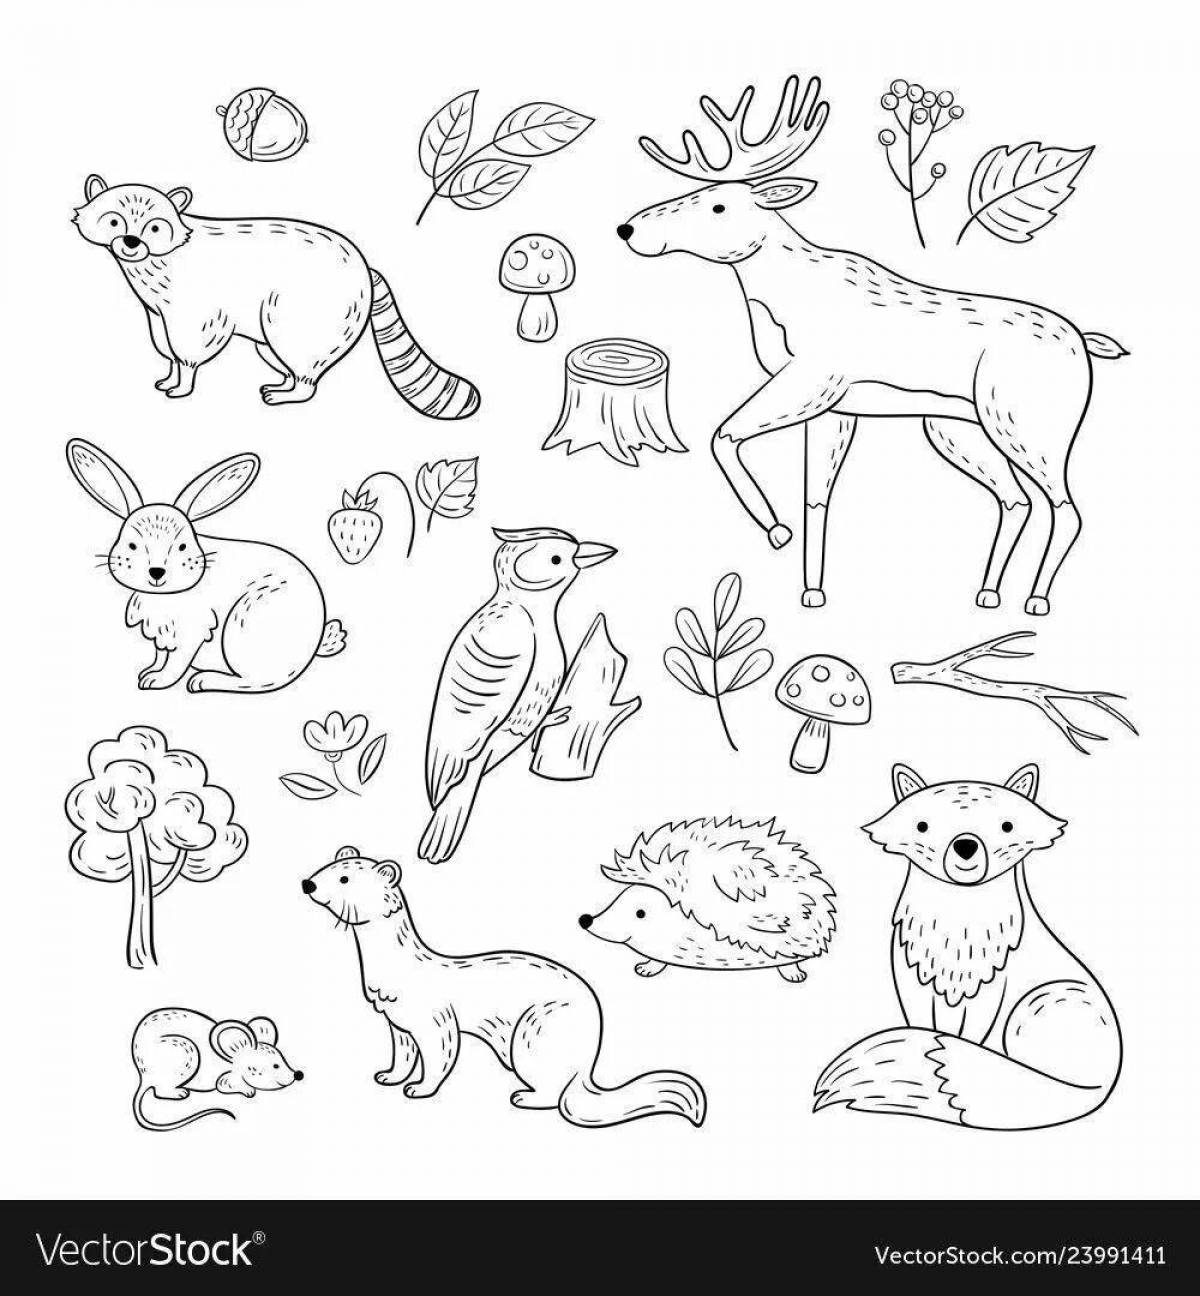 Amazing animal coloring pages Grade 1